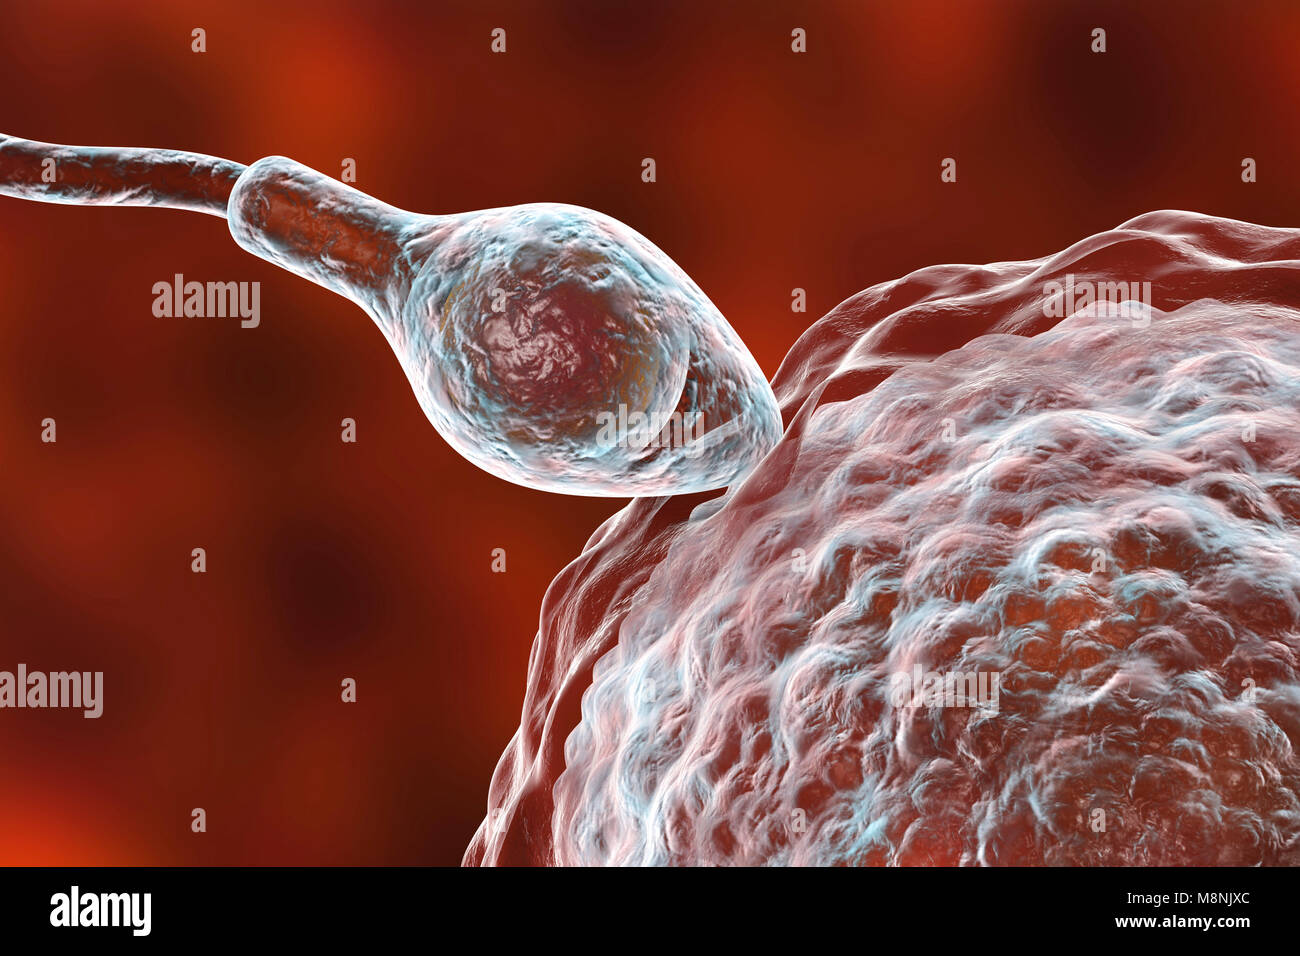 Human ovum, or egg, surrounded by numerous spermatozoa, computer illustration. In fertilisation, only a single sperm may successfully penetrate the ovum to fuse with the female nucleus. Barriers to be overcome include layers of follicular cells surrounding the ovum (corona radiata) and an underlying glycoprotein membrane, the zona pellucida. The membrane is digested by enzymes released from the acrosome, a cap on the head of the sperm: subsequent rapid chemical changes in the zona pellucida prevent competing sperm from entering. Stock Photo